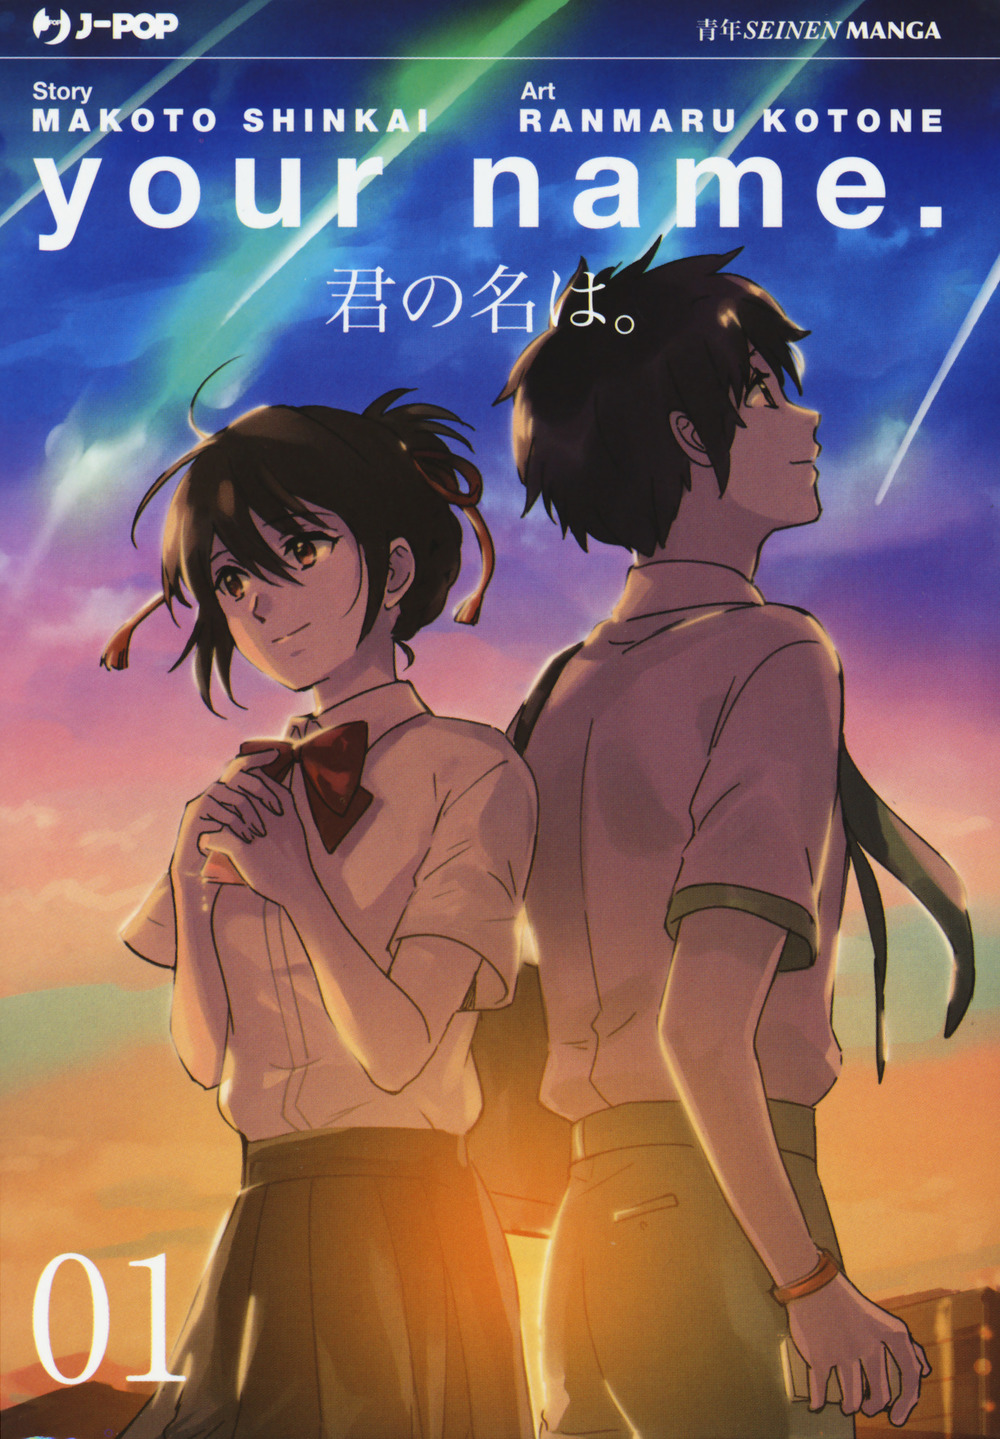 Your name. Vol. 1